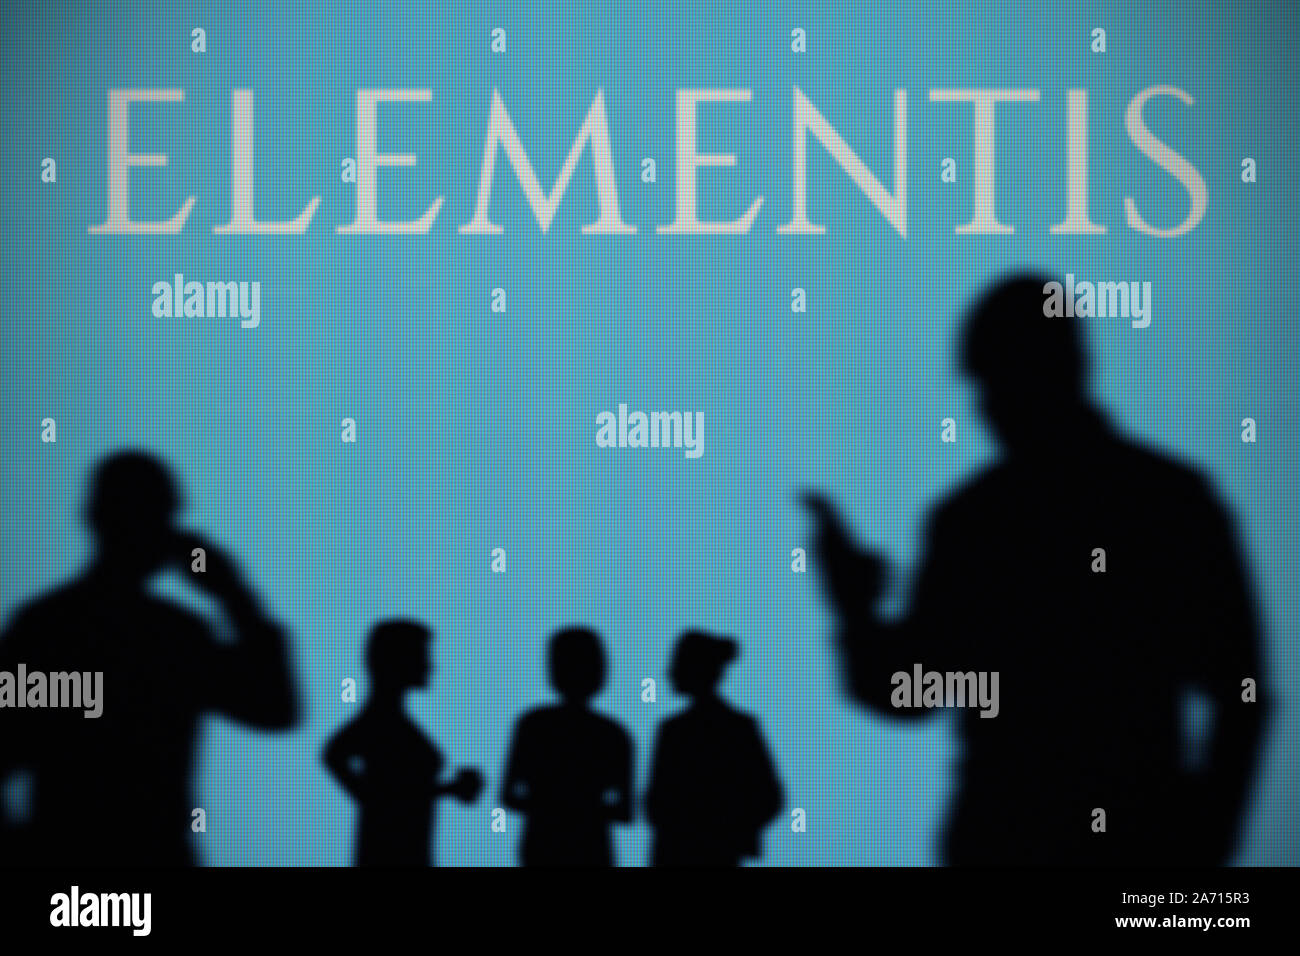 The Elementis logo is seen on an LED screen in the background while a silhouetted person uses a smartphone (Editorial use only) Stock Photo